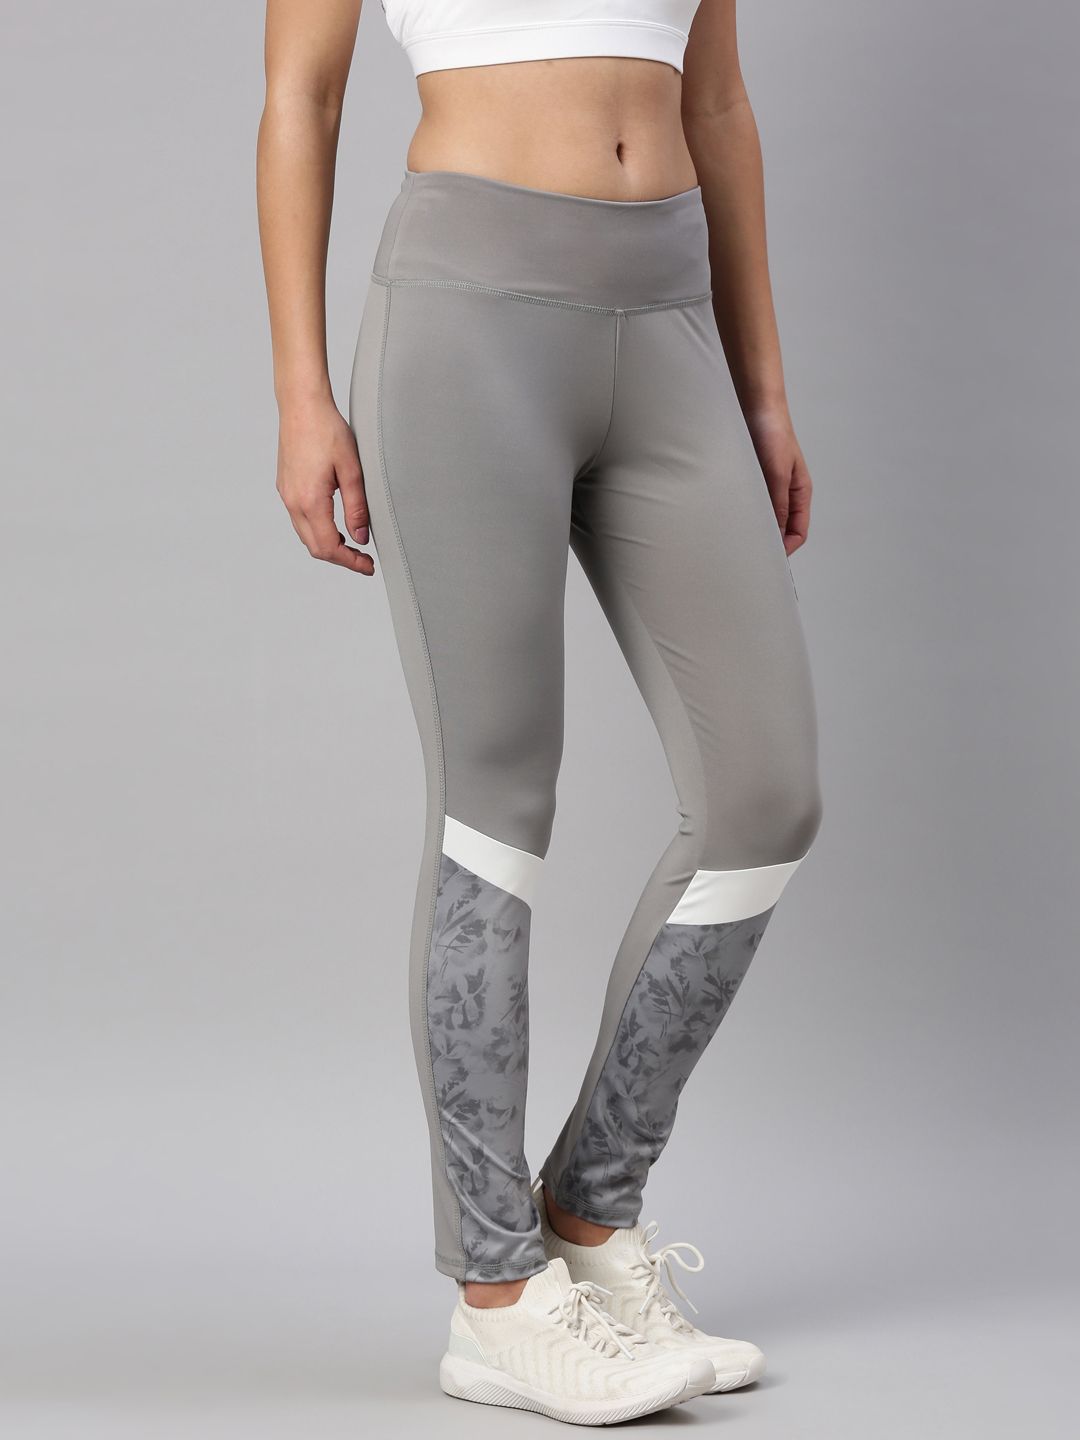 Women's Recovermax Color Block Tights